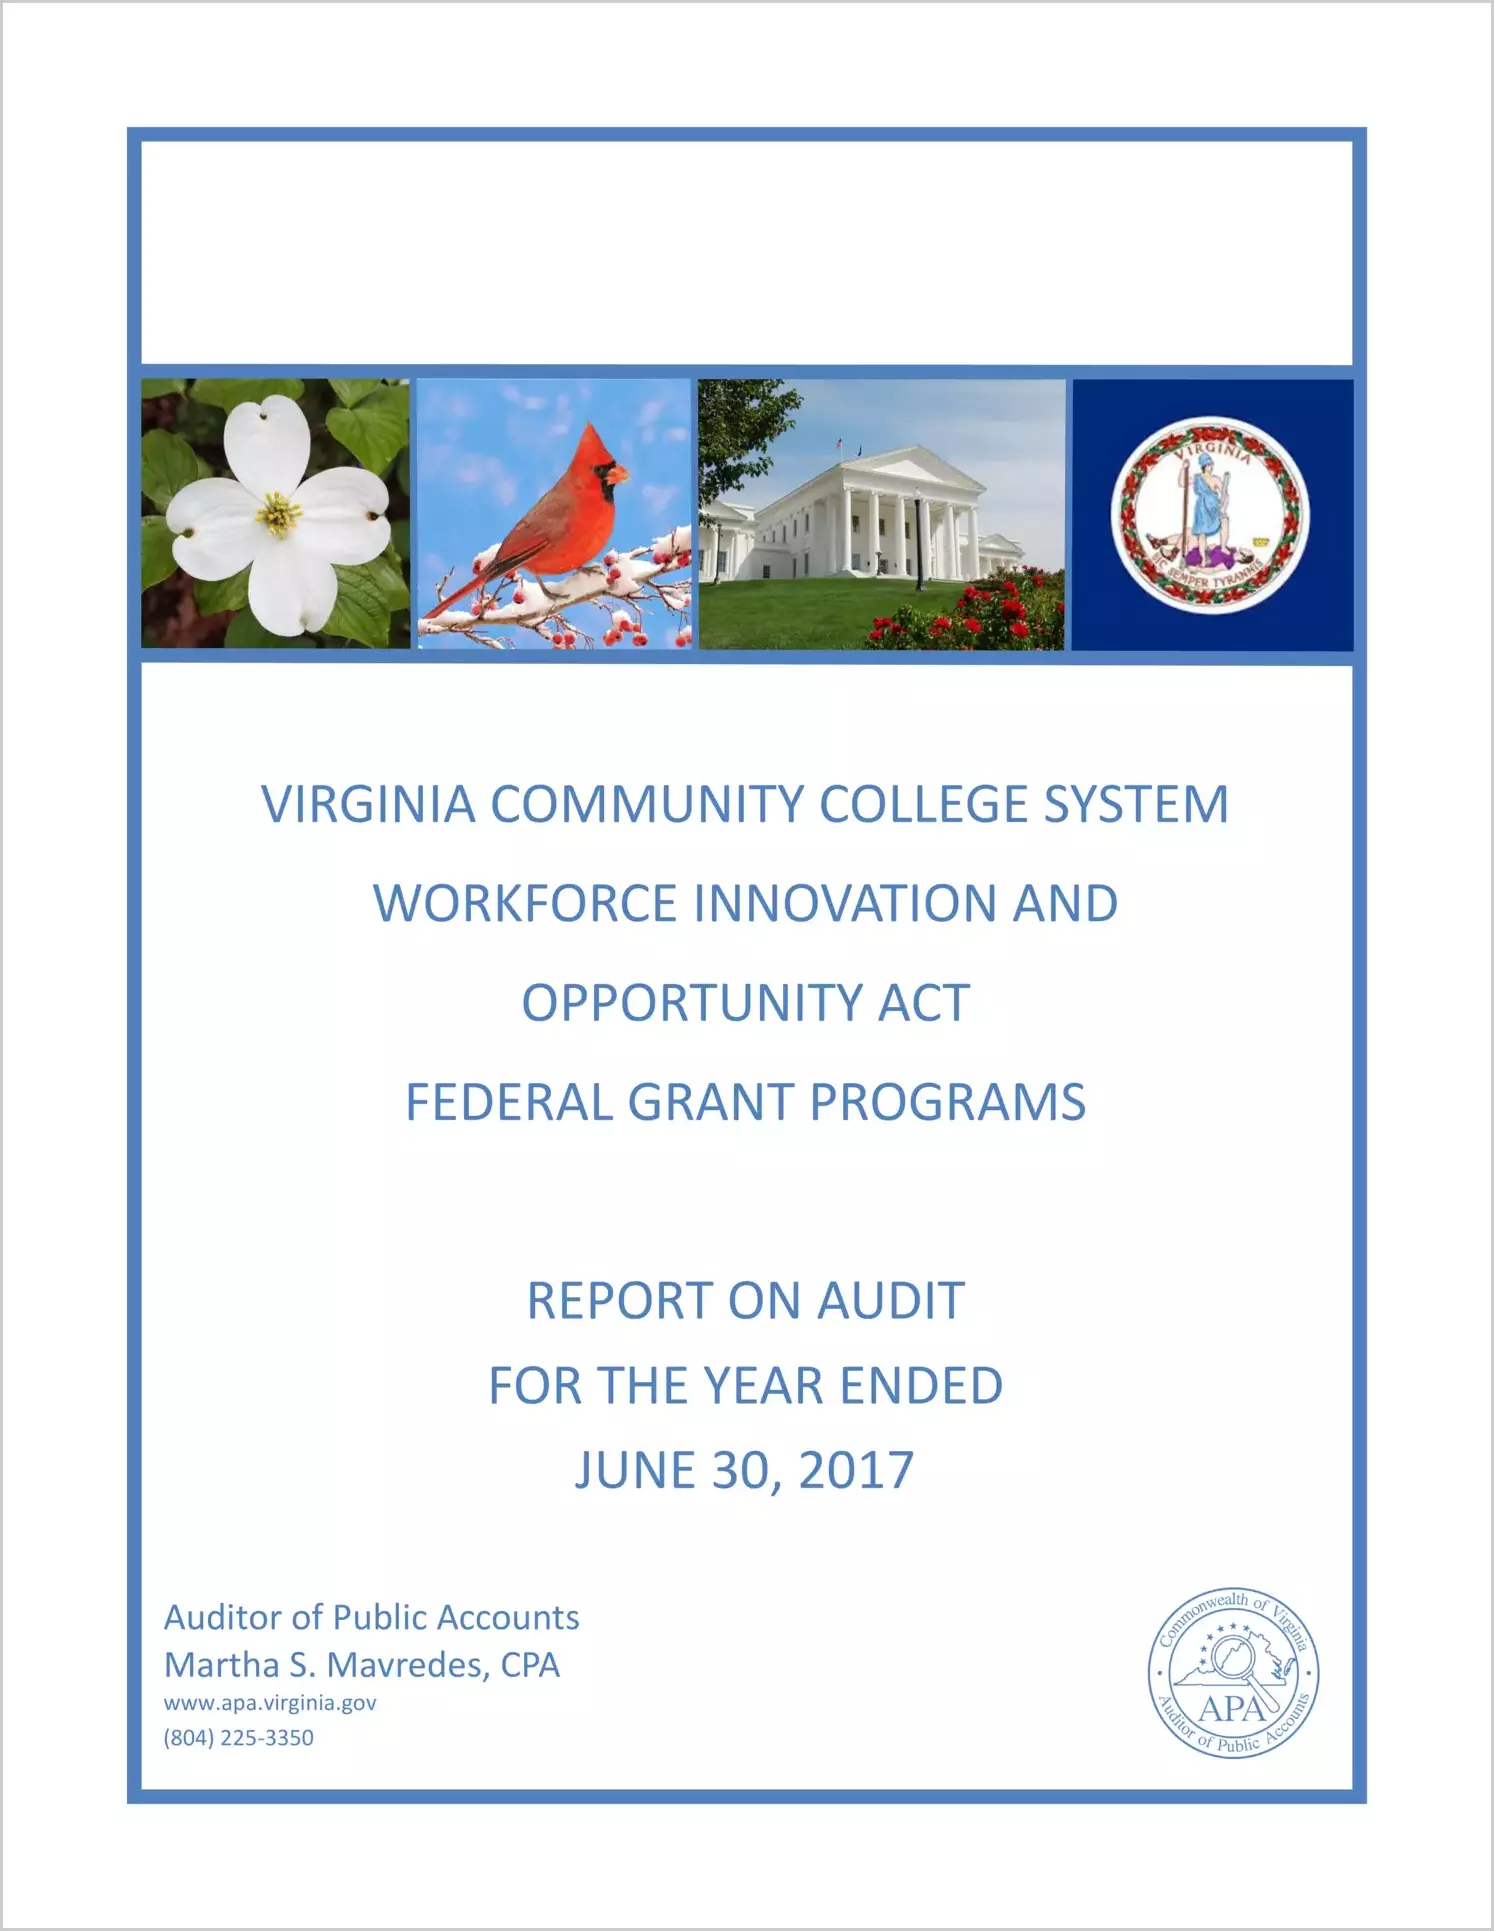 Virginia Community College System Workforce Innovation and Opportunity Act Federal Grant Programs for the year ended June 30, 2017